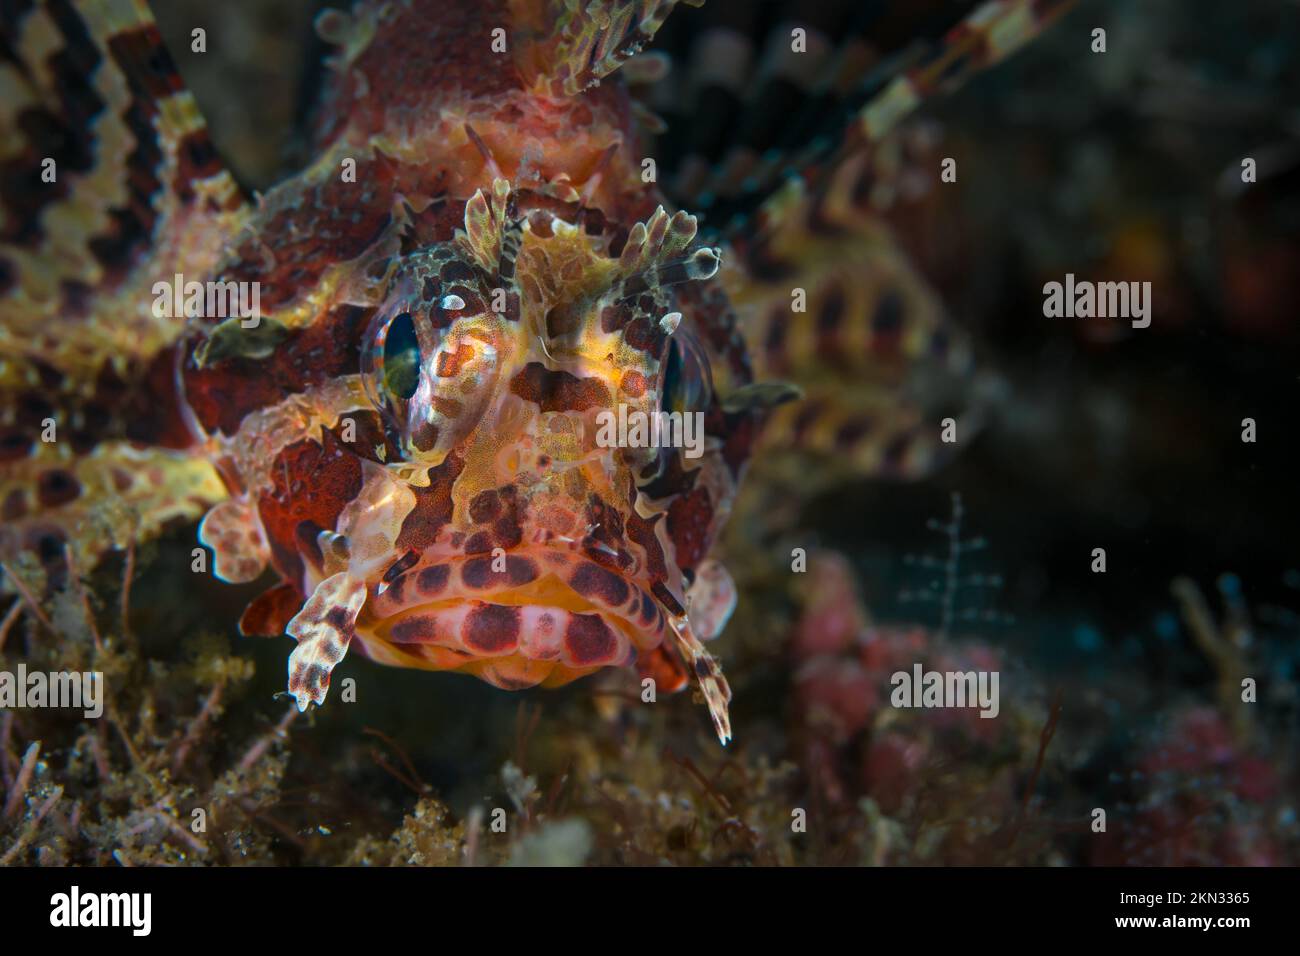 Lionfish portrait on coral reef in the wild Stock Photo